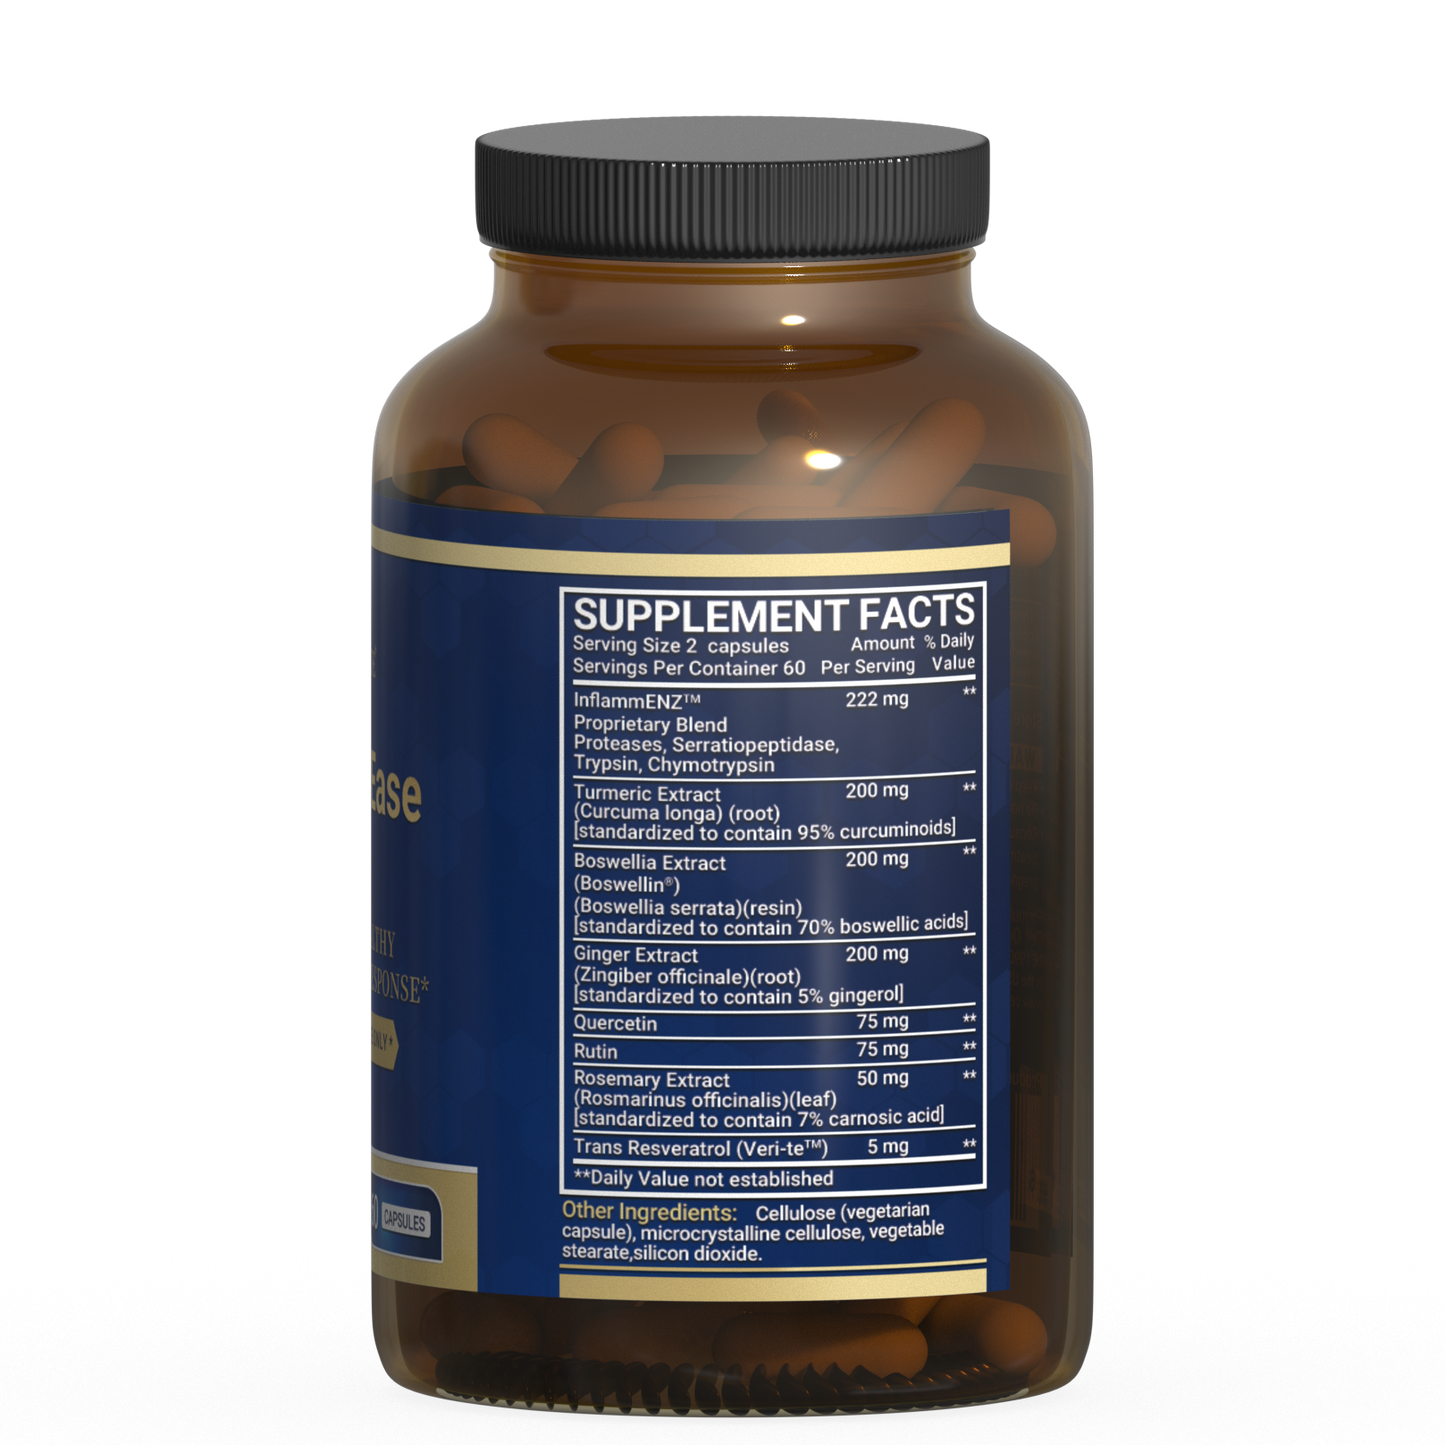 Inflama-Ease Supplement,Inflammatory Health & Joint Support